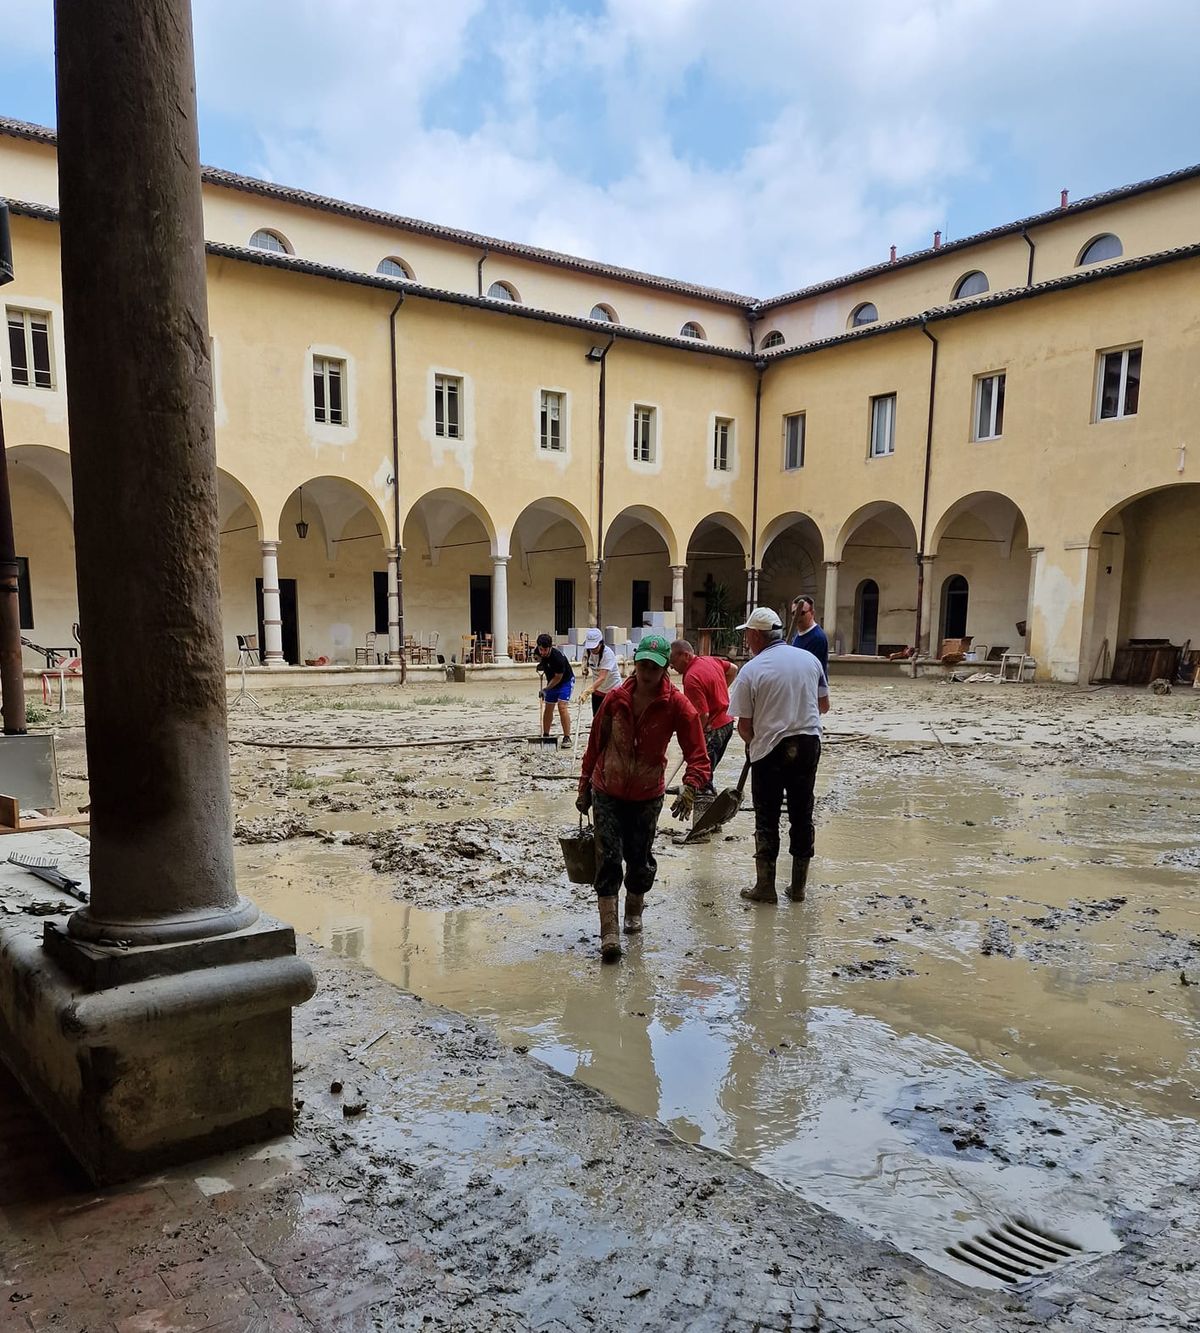 San Francesco basilica is just one of the landmarks in the region damaged by the flood.

Photo: Assessore Cultura Emilia-Romagna